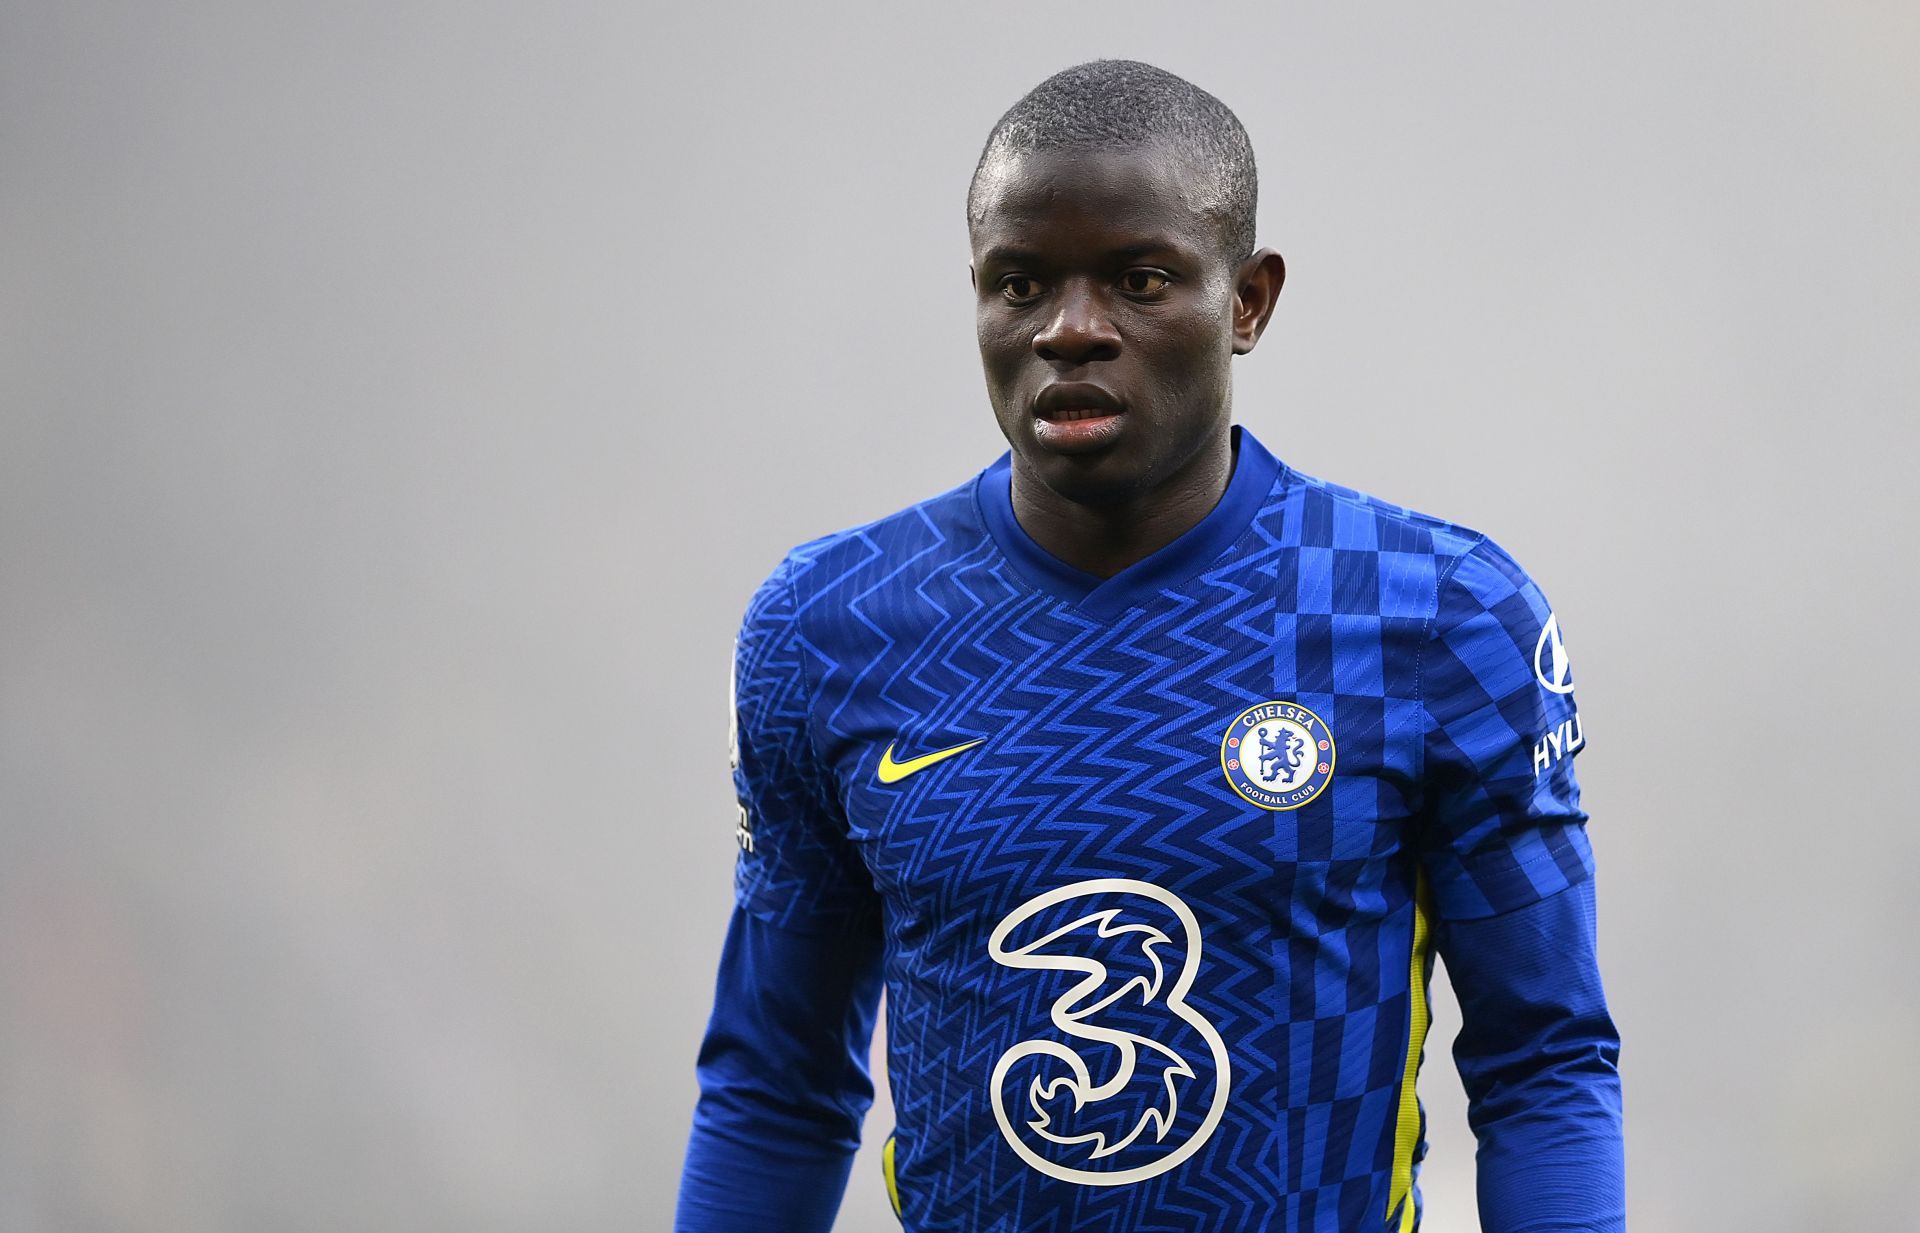 Kante is one of the best midfielders in the world